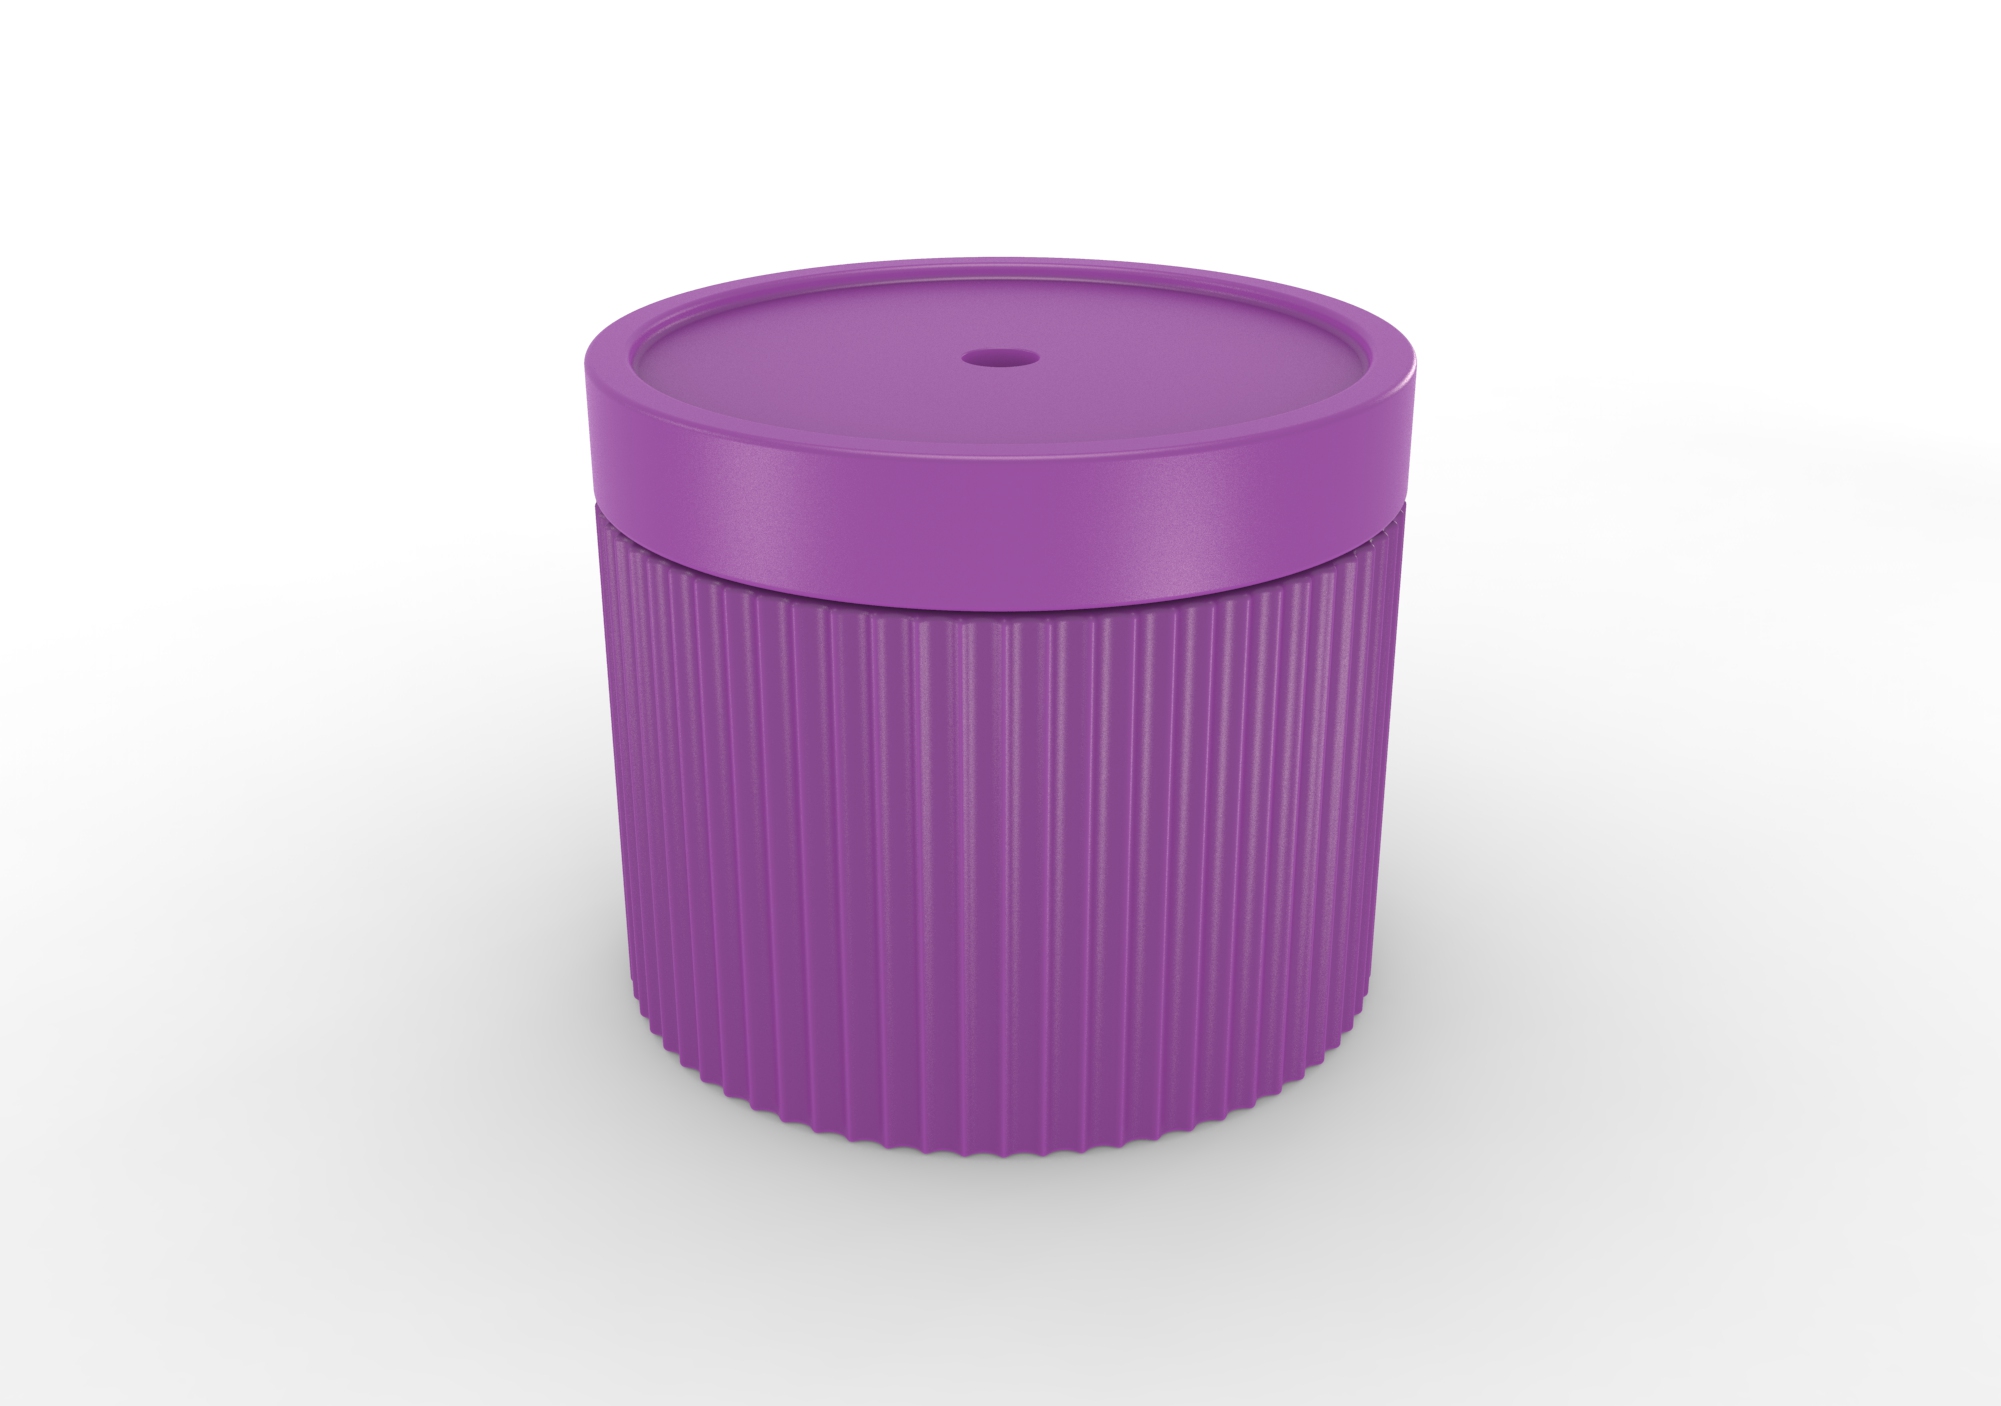 SPLRWIDETABLEVI Ripple Wide Table with Umbrella Hole -Violet